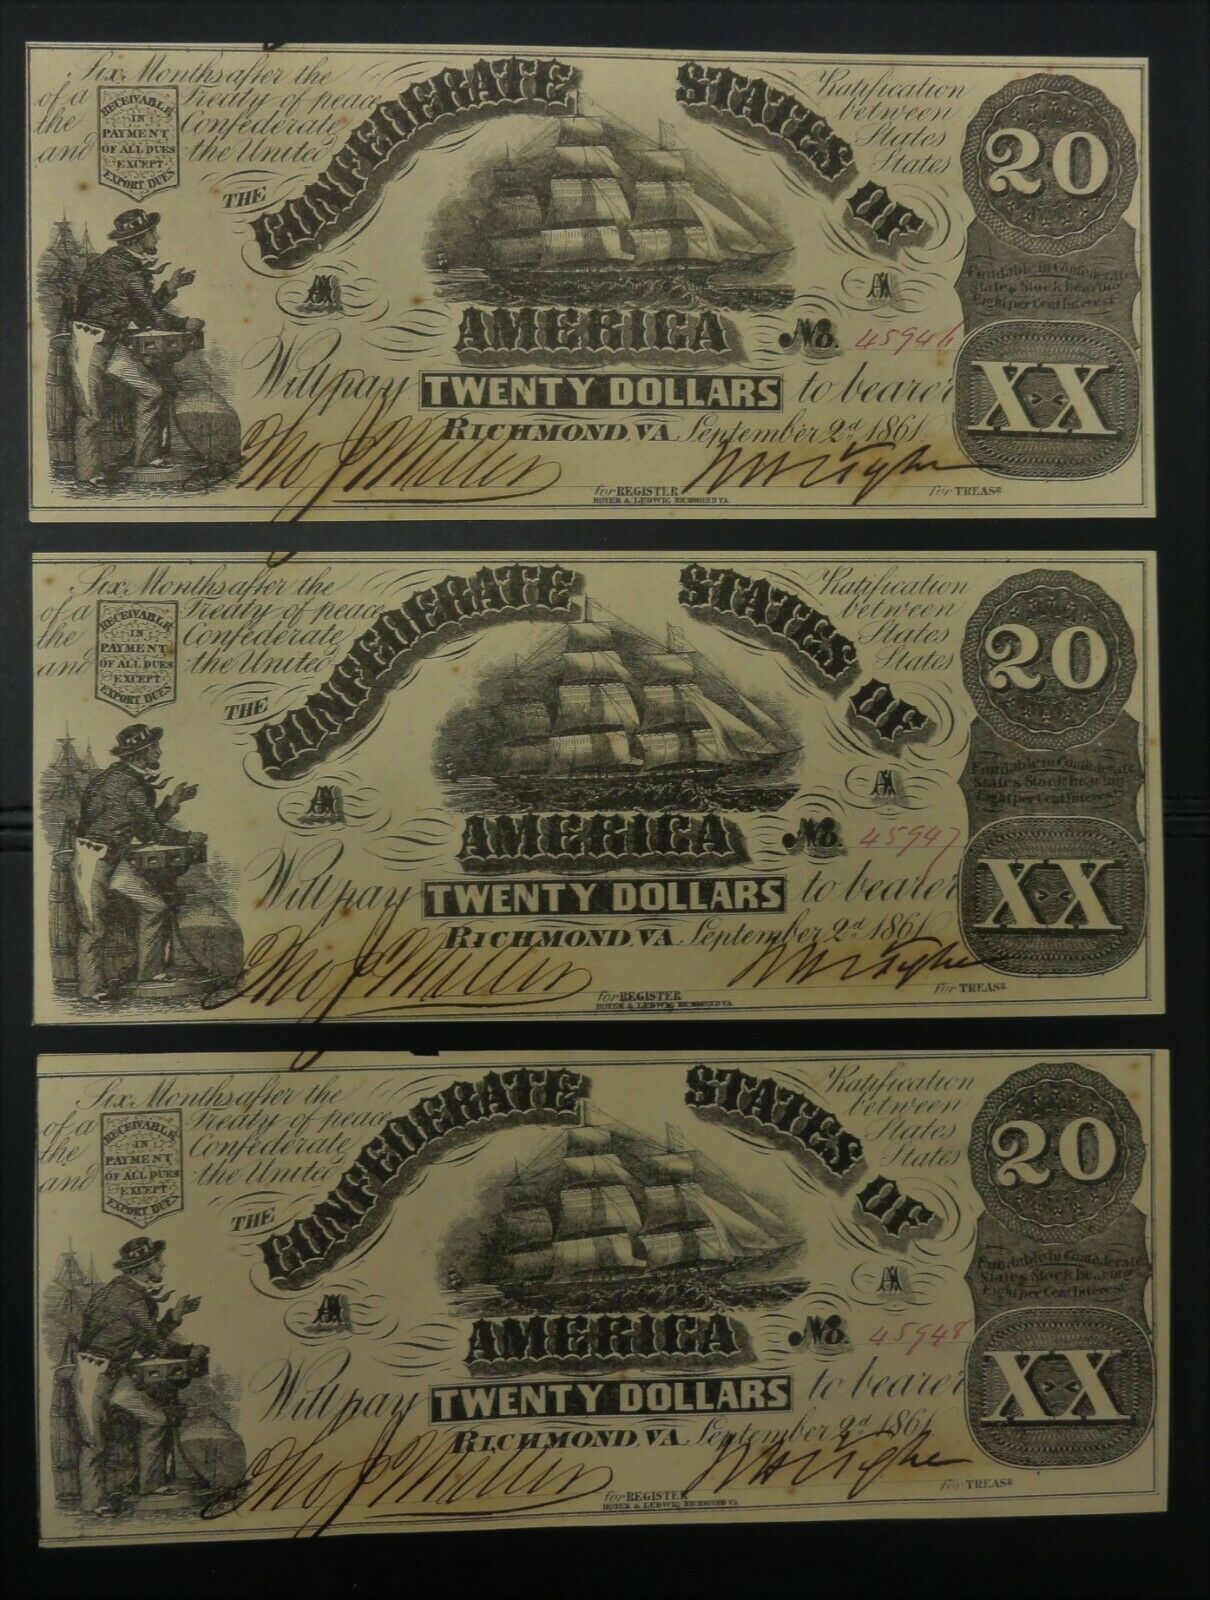 September 2, 1861 $20 T-18 Confederate States 3 Consecutive Sequential Notes